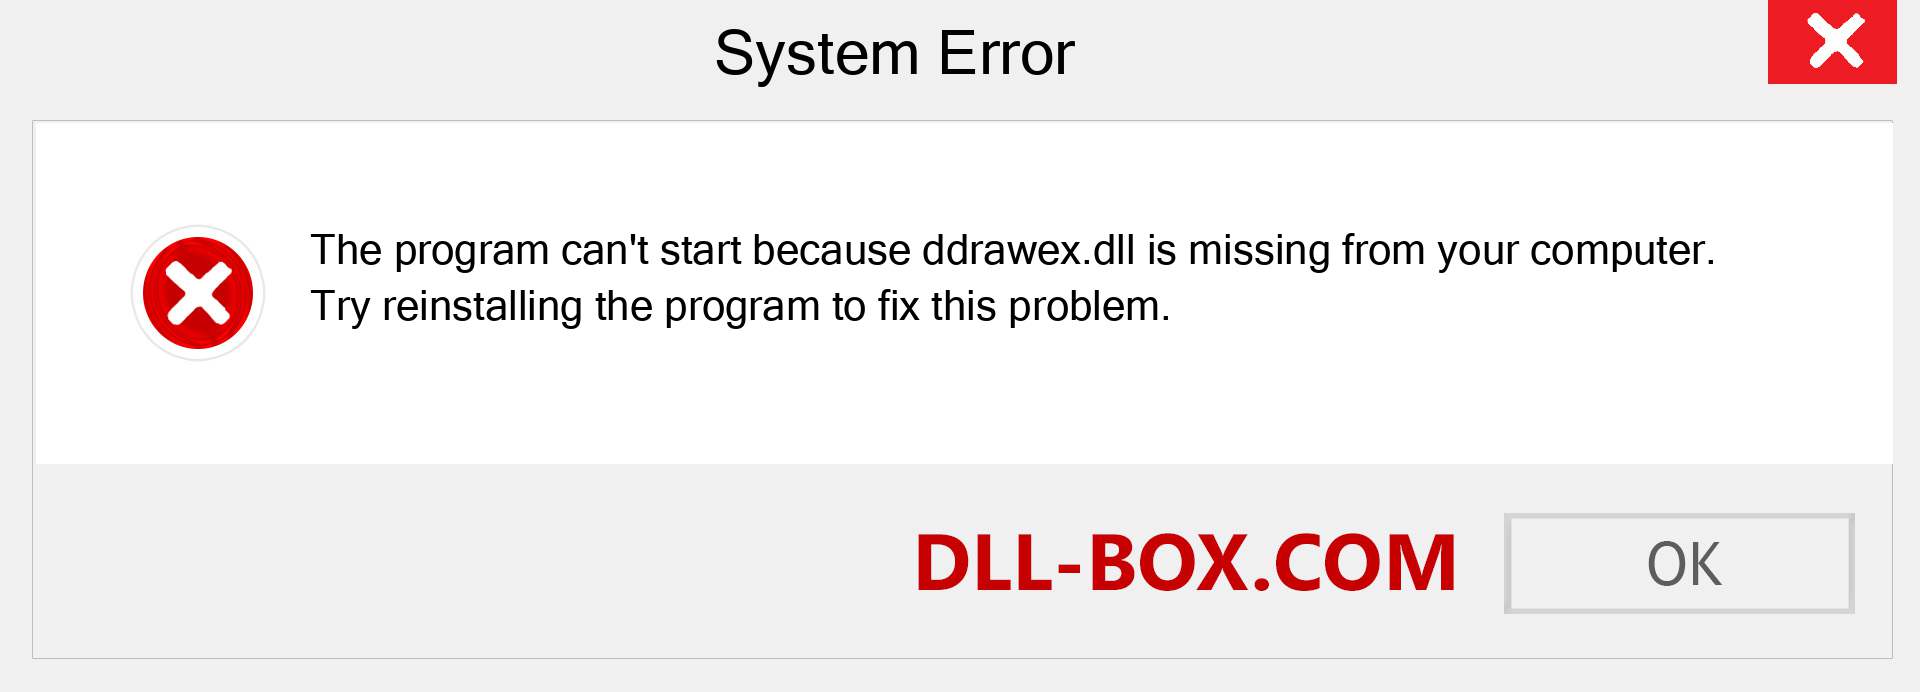  ddrawex.dll file is missing?. Download for Windows 7, 8, 10 - Fix  ddrawex dll Missing Error on Windows, photos, images